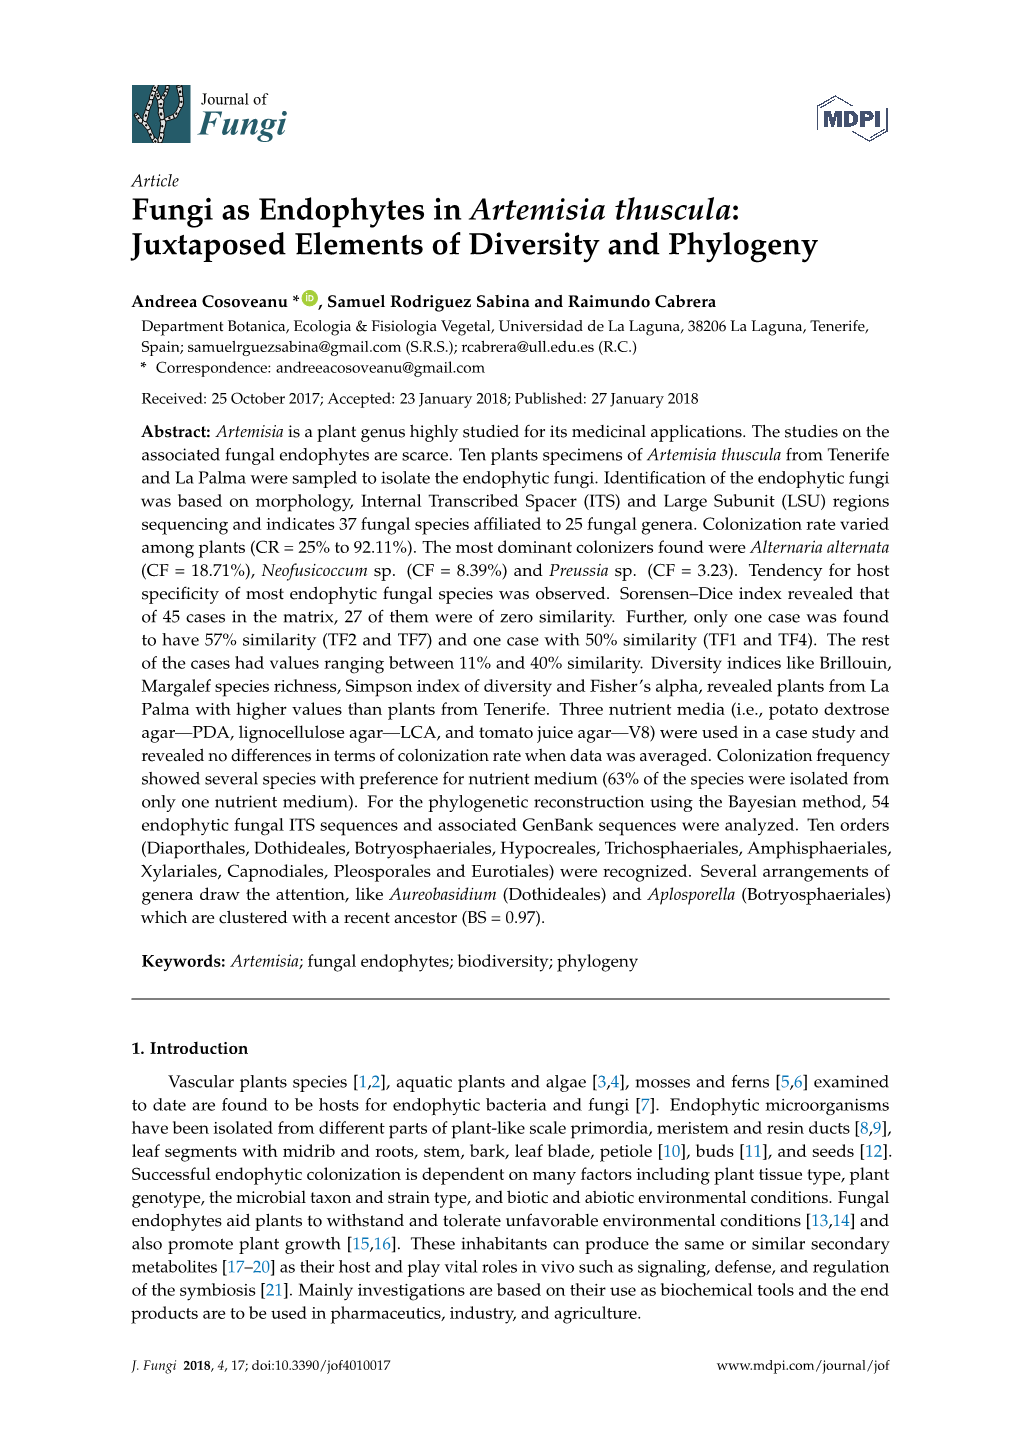 Fungi As Endophytes in Artemisia Thuscula: Juxtaposed Elements of Diversity and Phylogeny